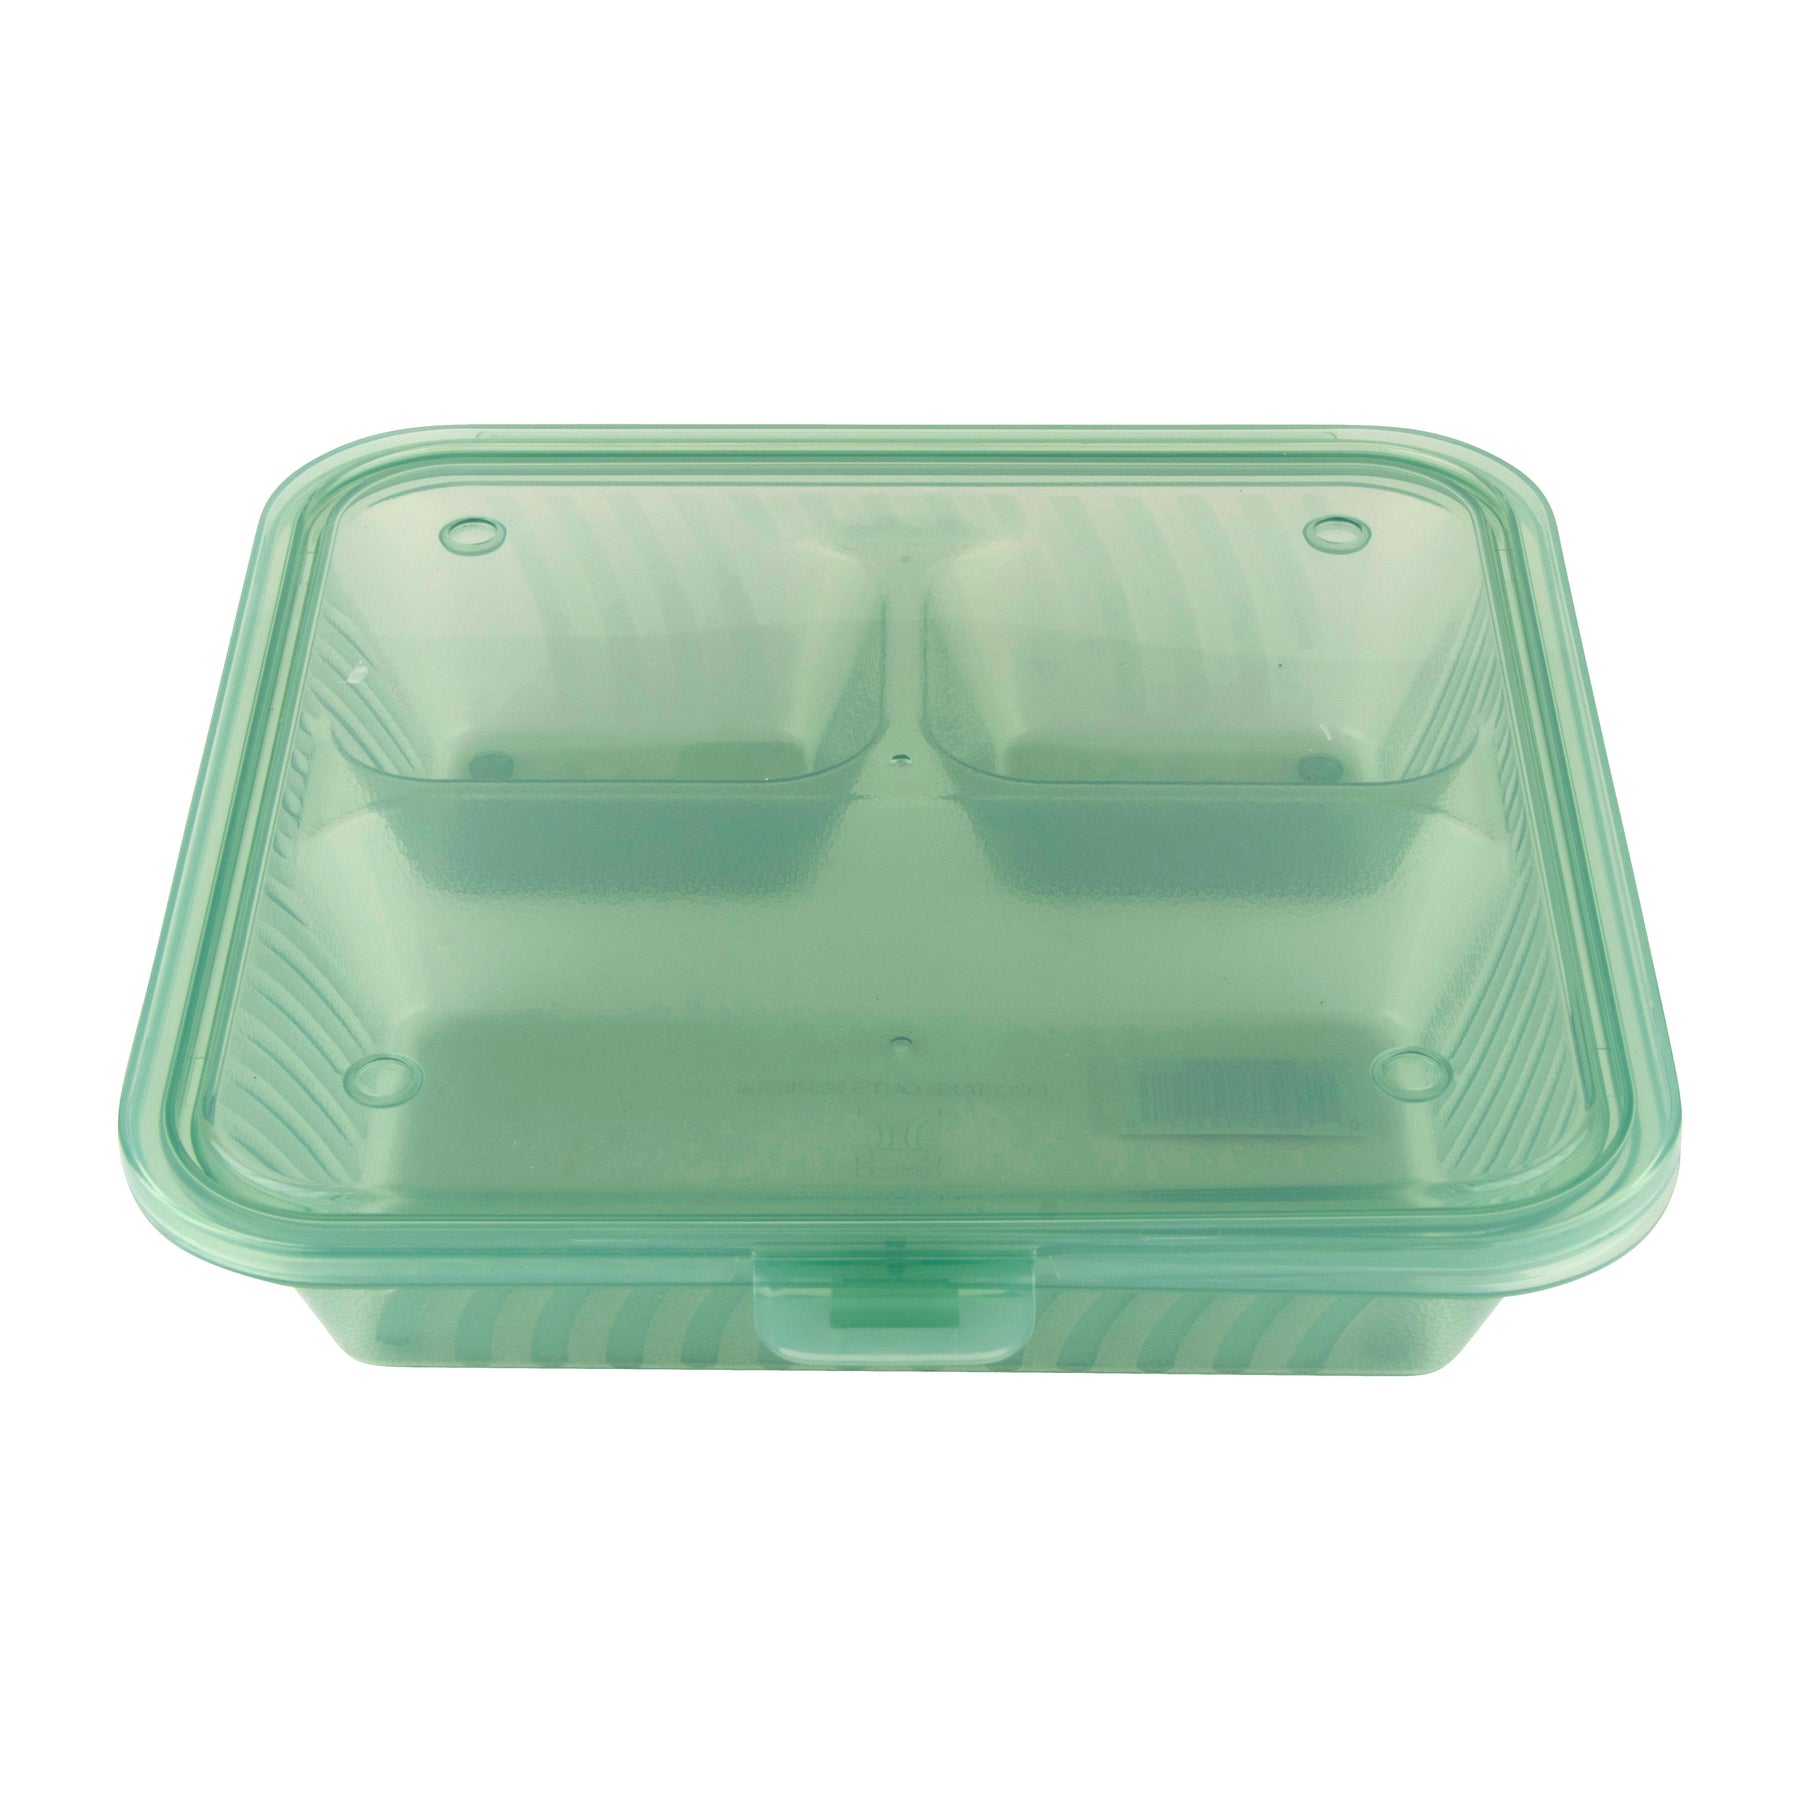 9'' x 9'' Flat Top 3-Compartment Food Container, 3.5 deep (Set of 4 ea.)